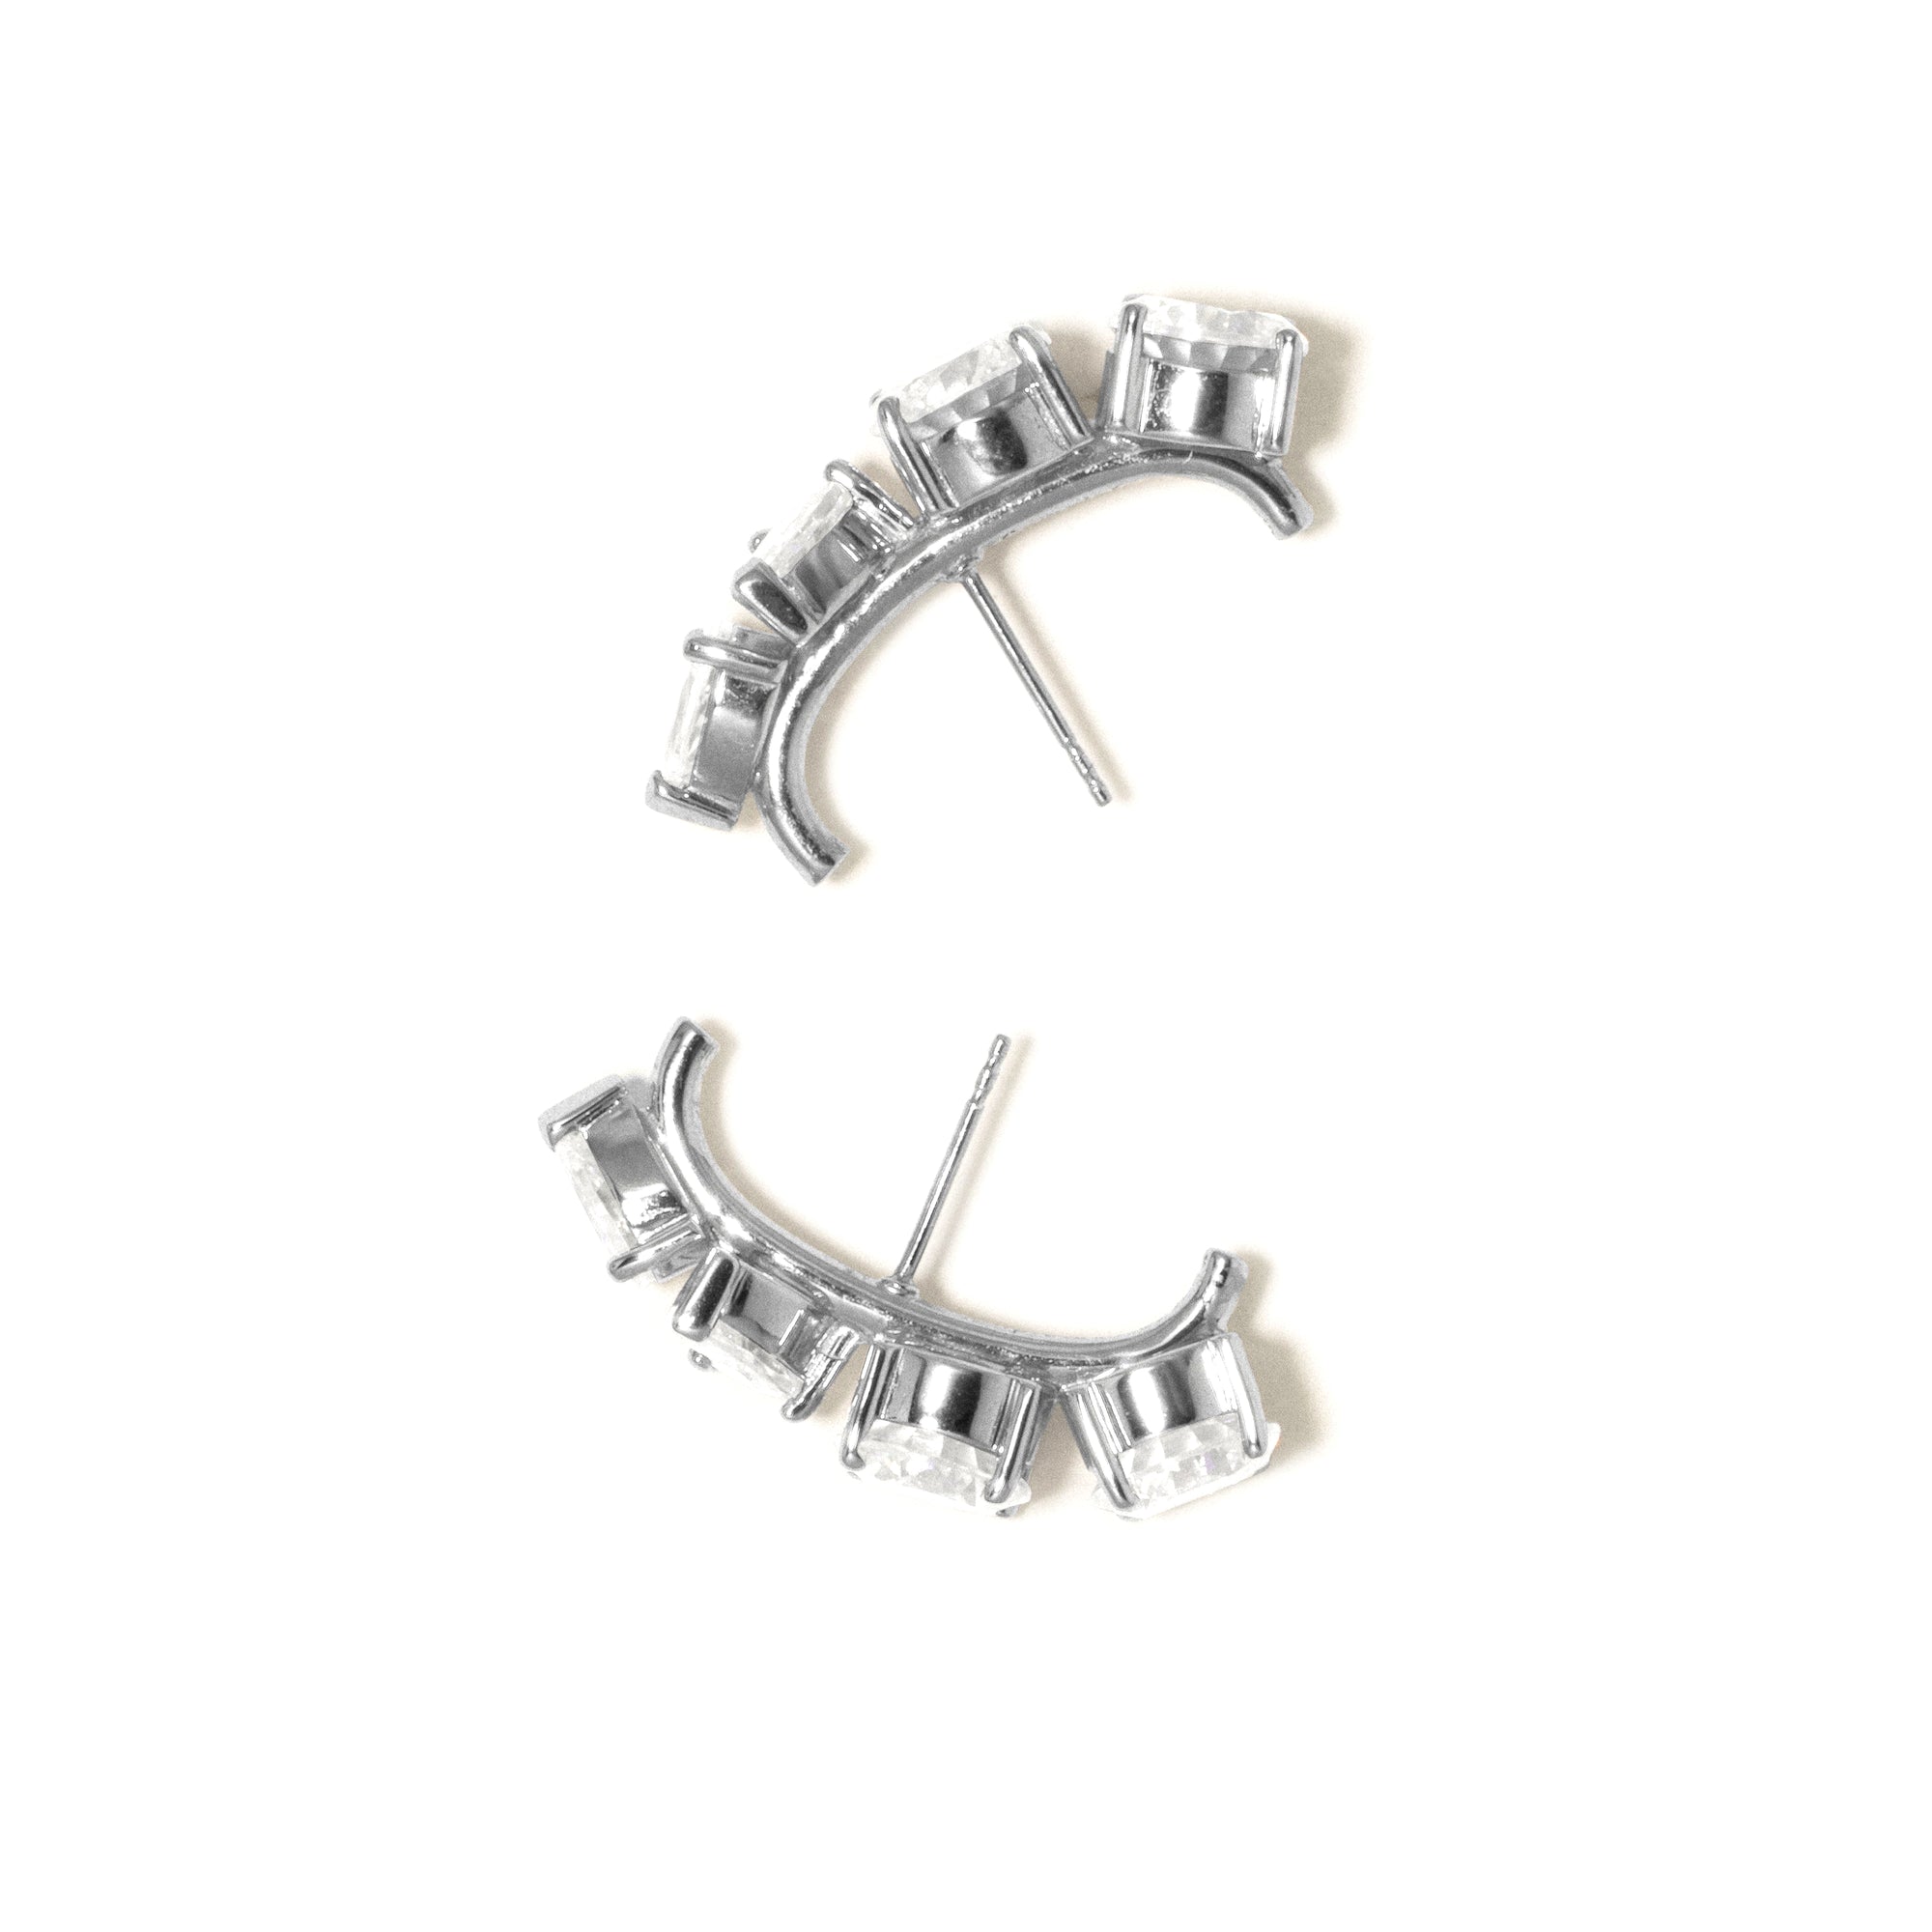 Completedworks - Ear Climber Earrings - (Silver) view 4